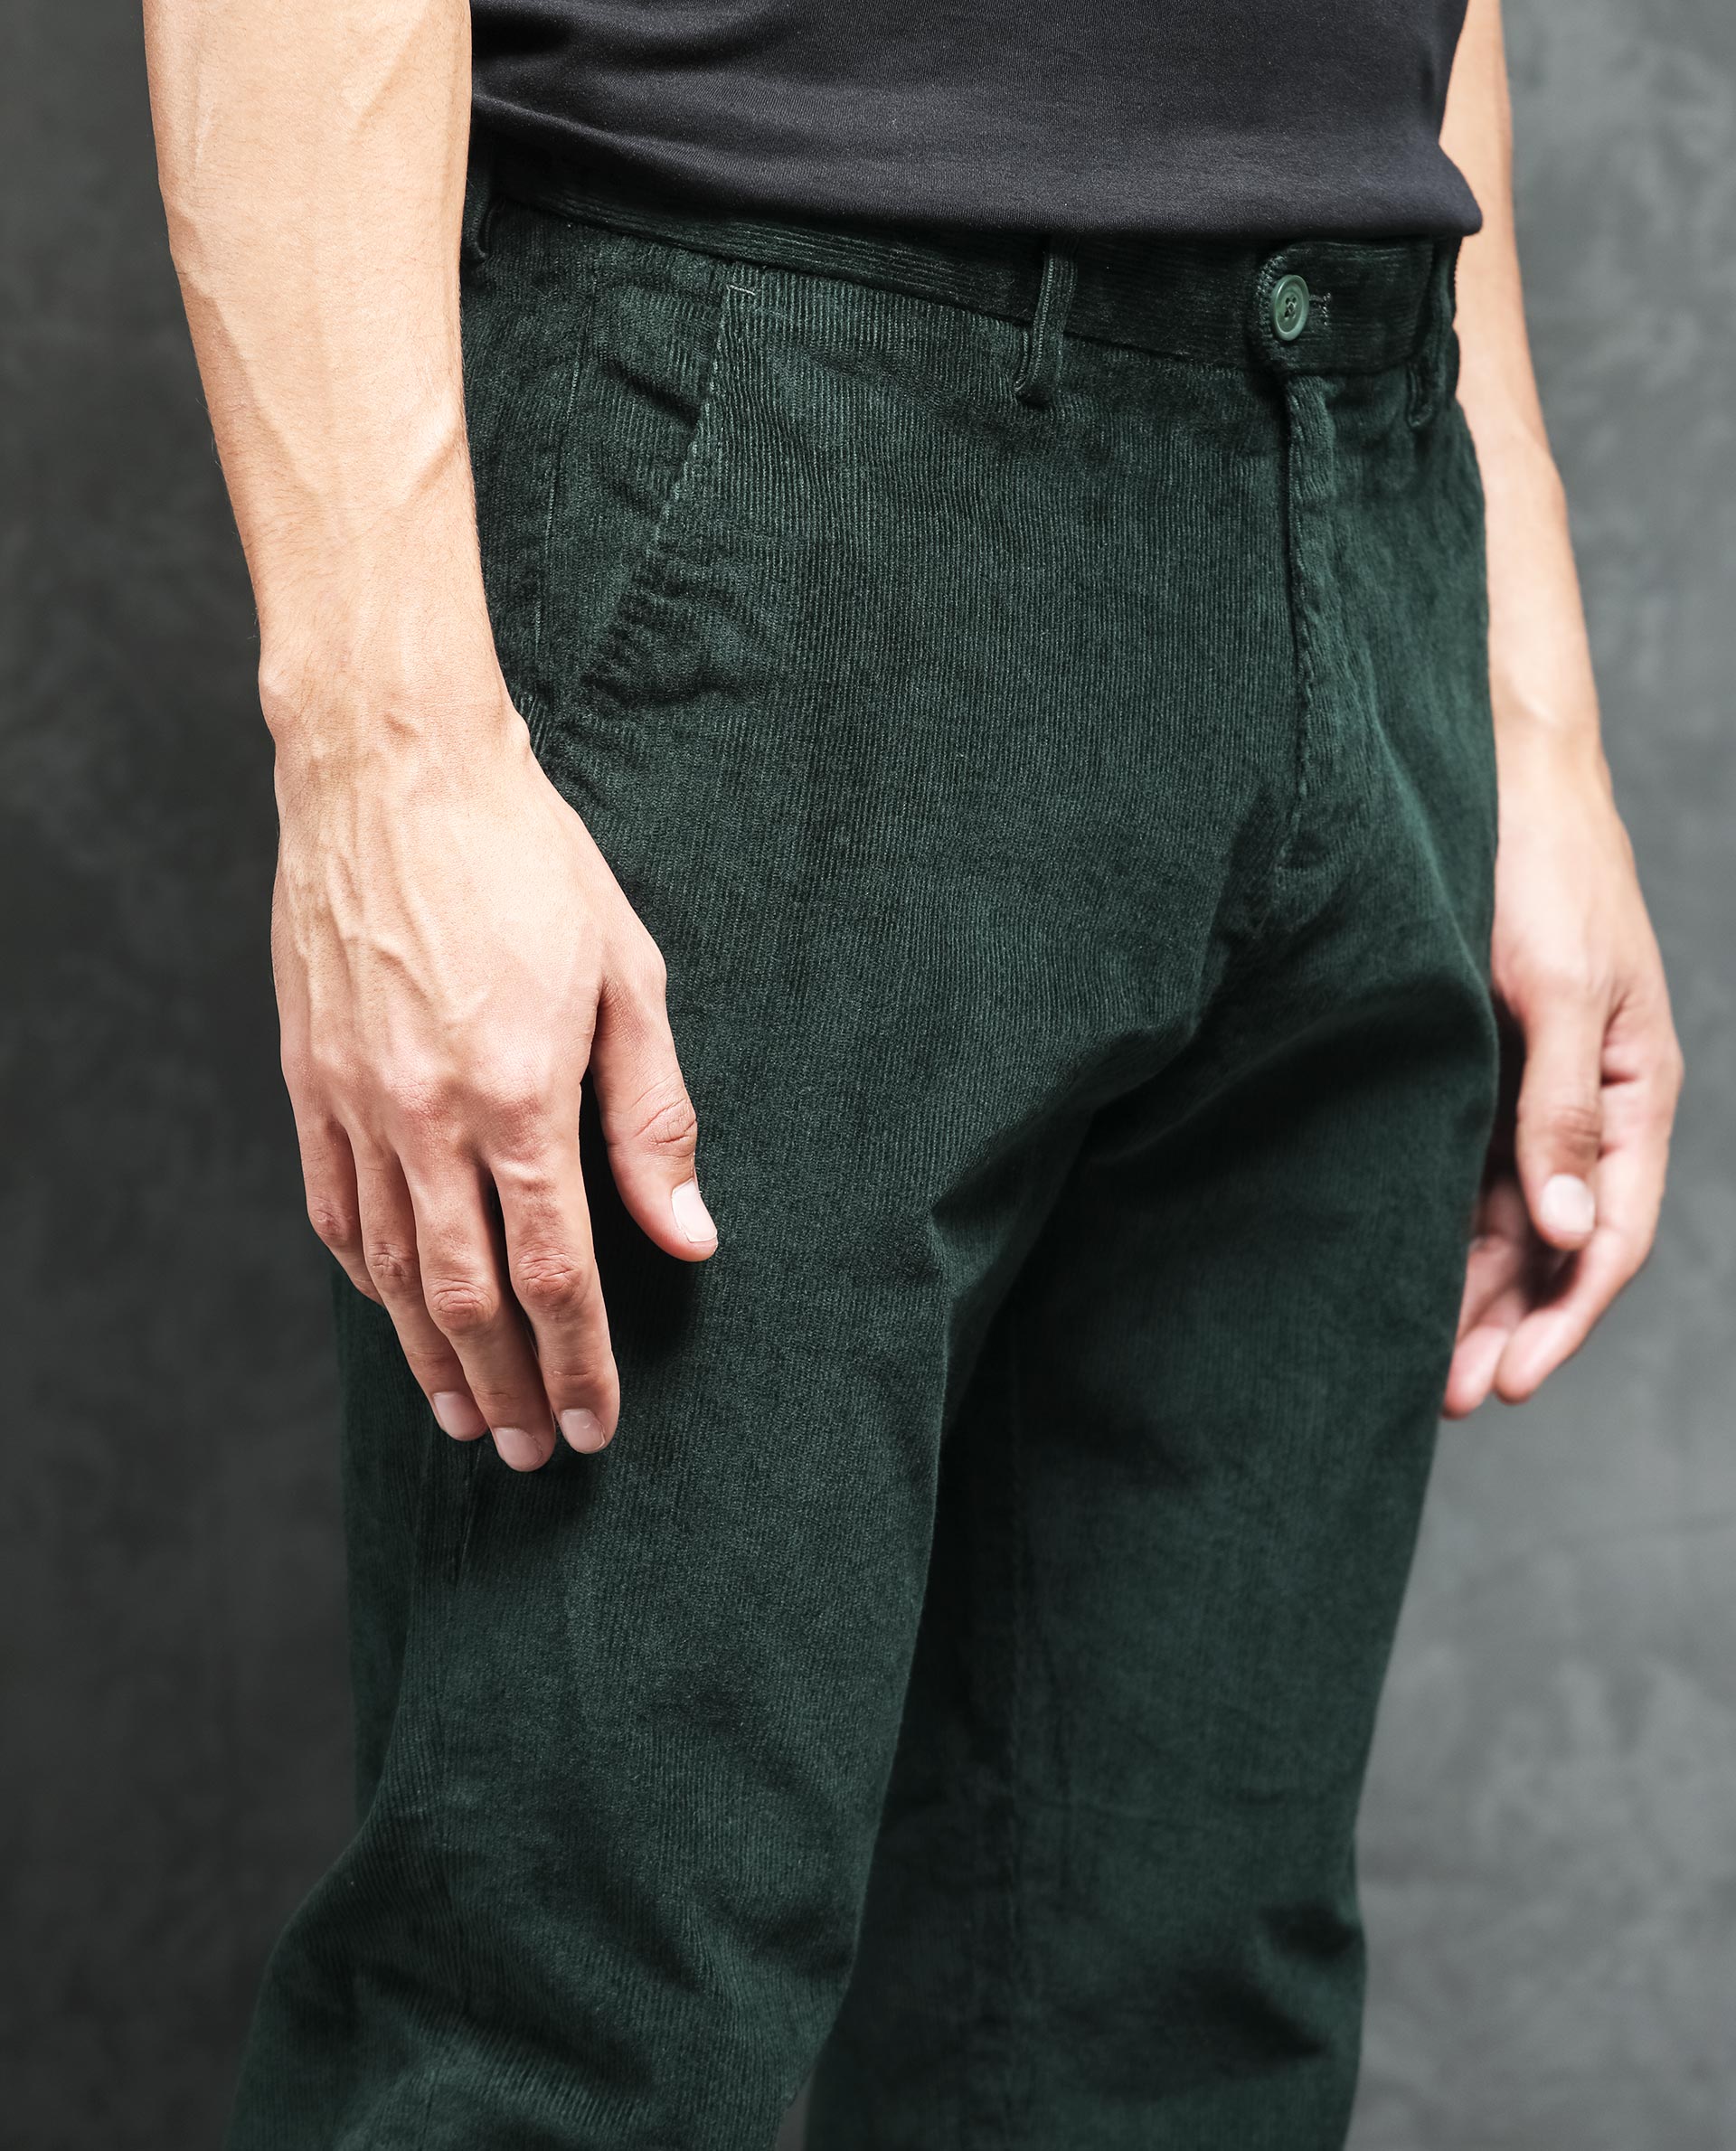 SOLID BOTTLE GREEN TROUSERS FOR MENS | Roupa casual masculina, Roupas  masculinas, Terno